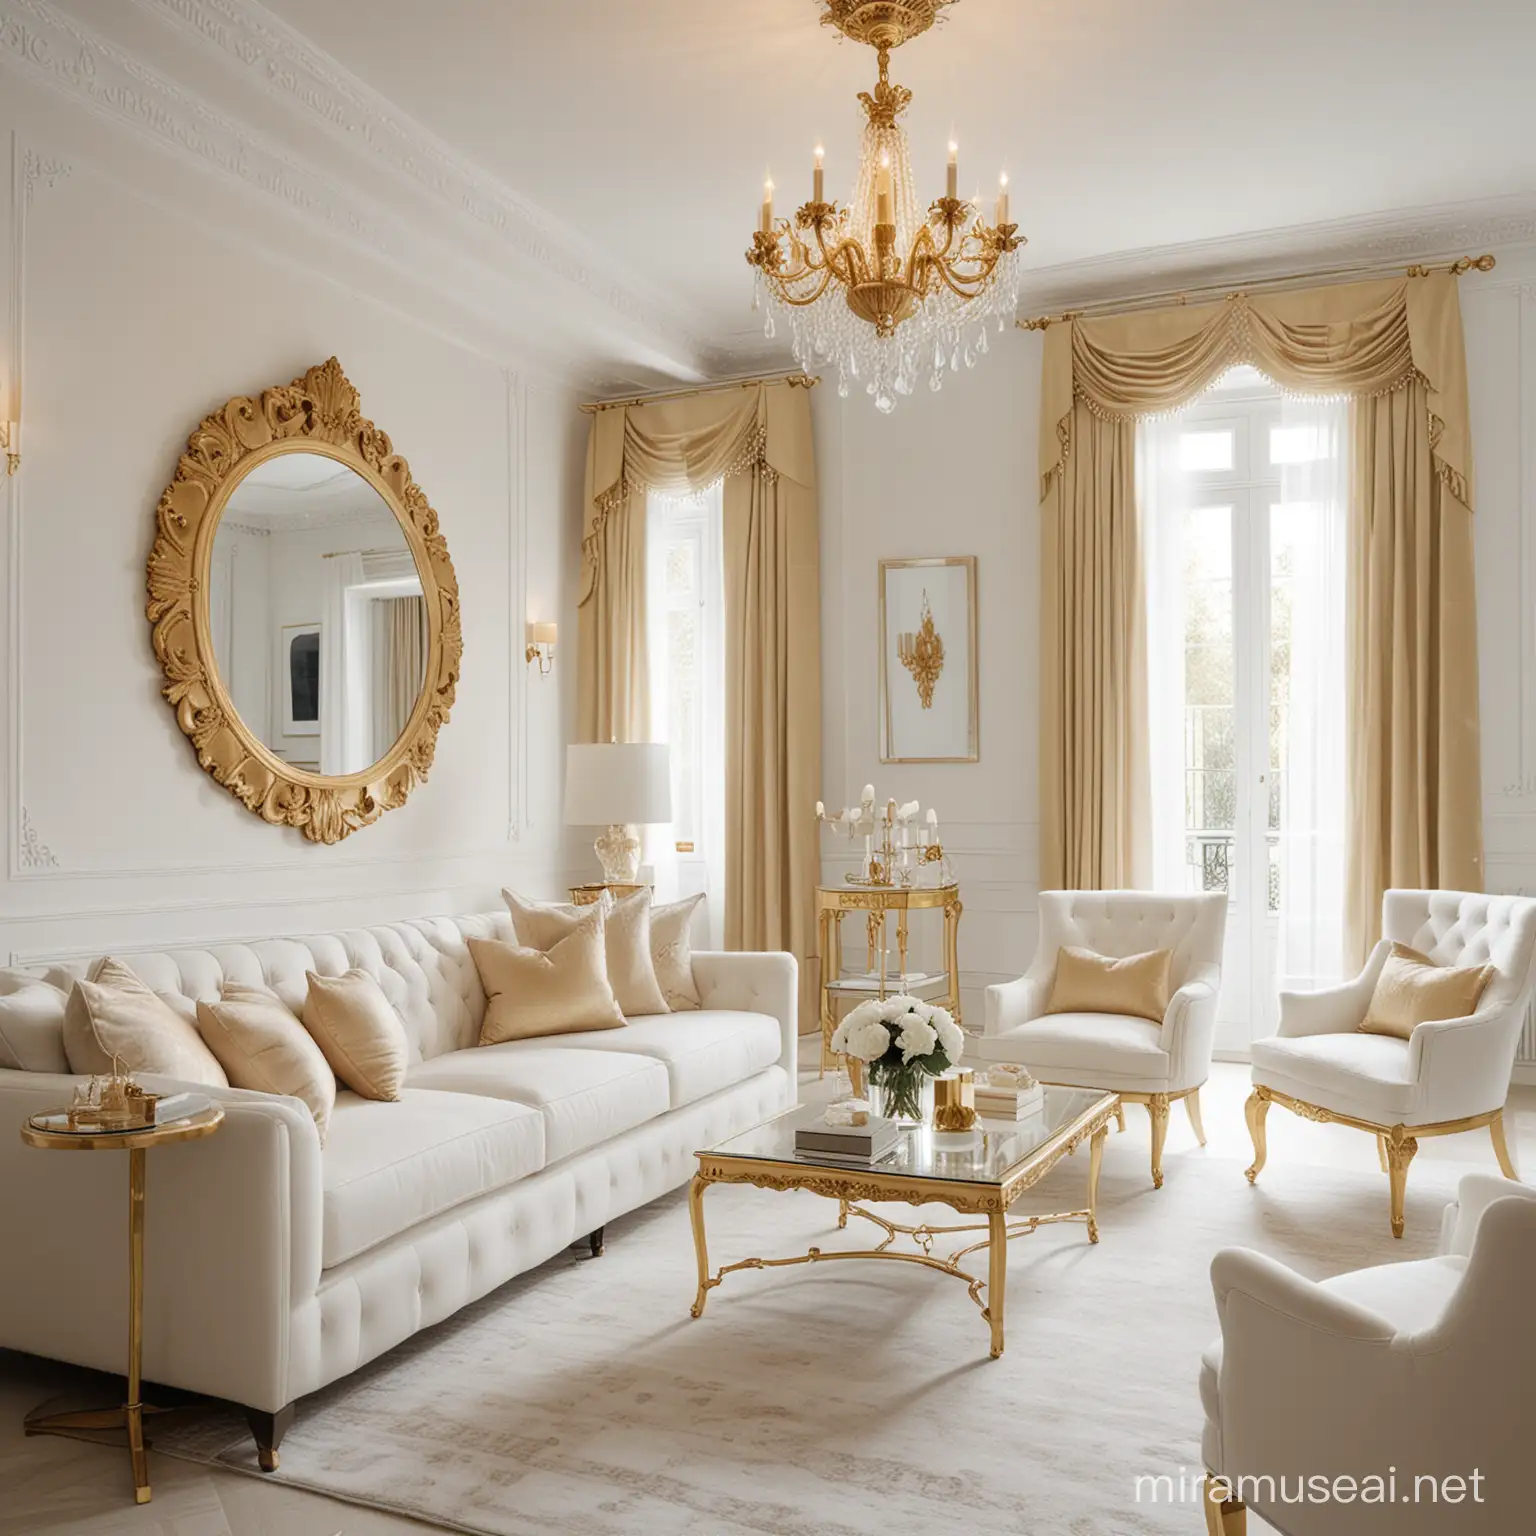 Luxury white and gold living room fully furnished, feminine flair